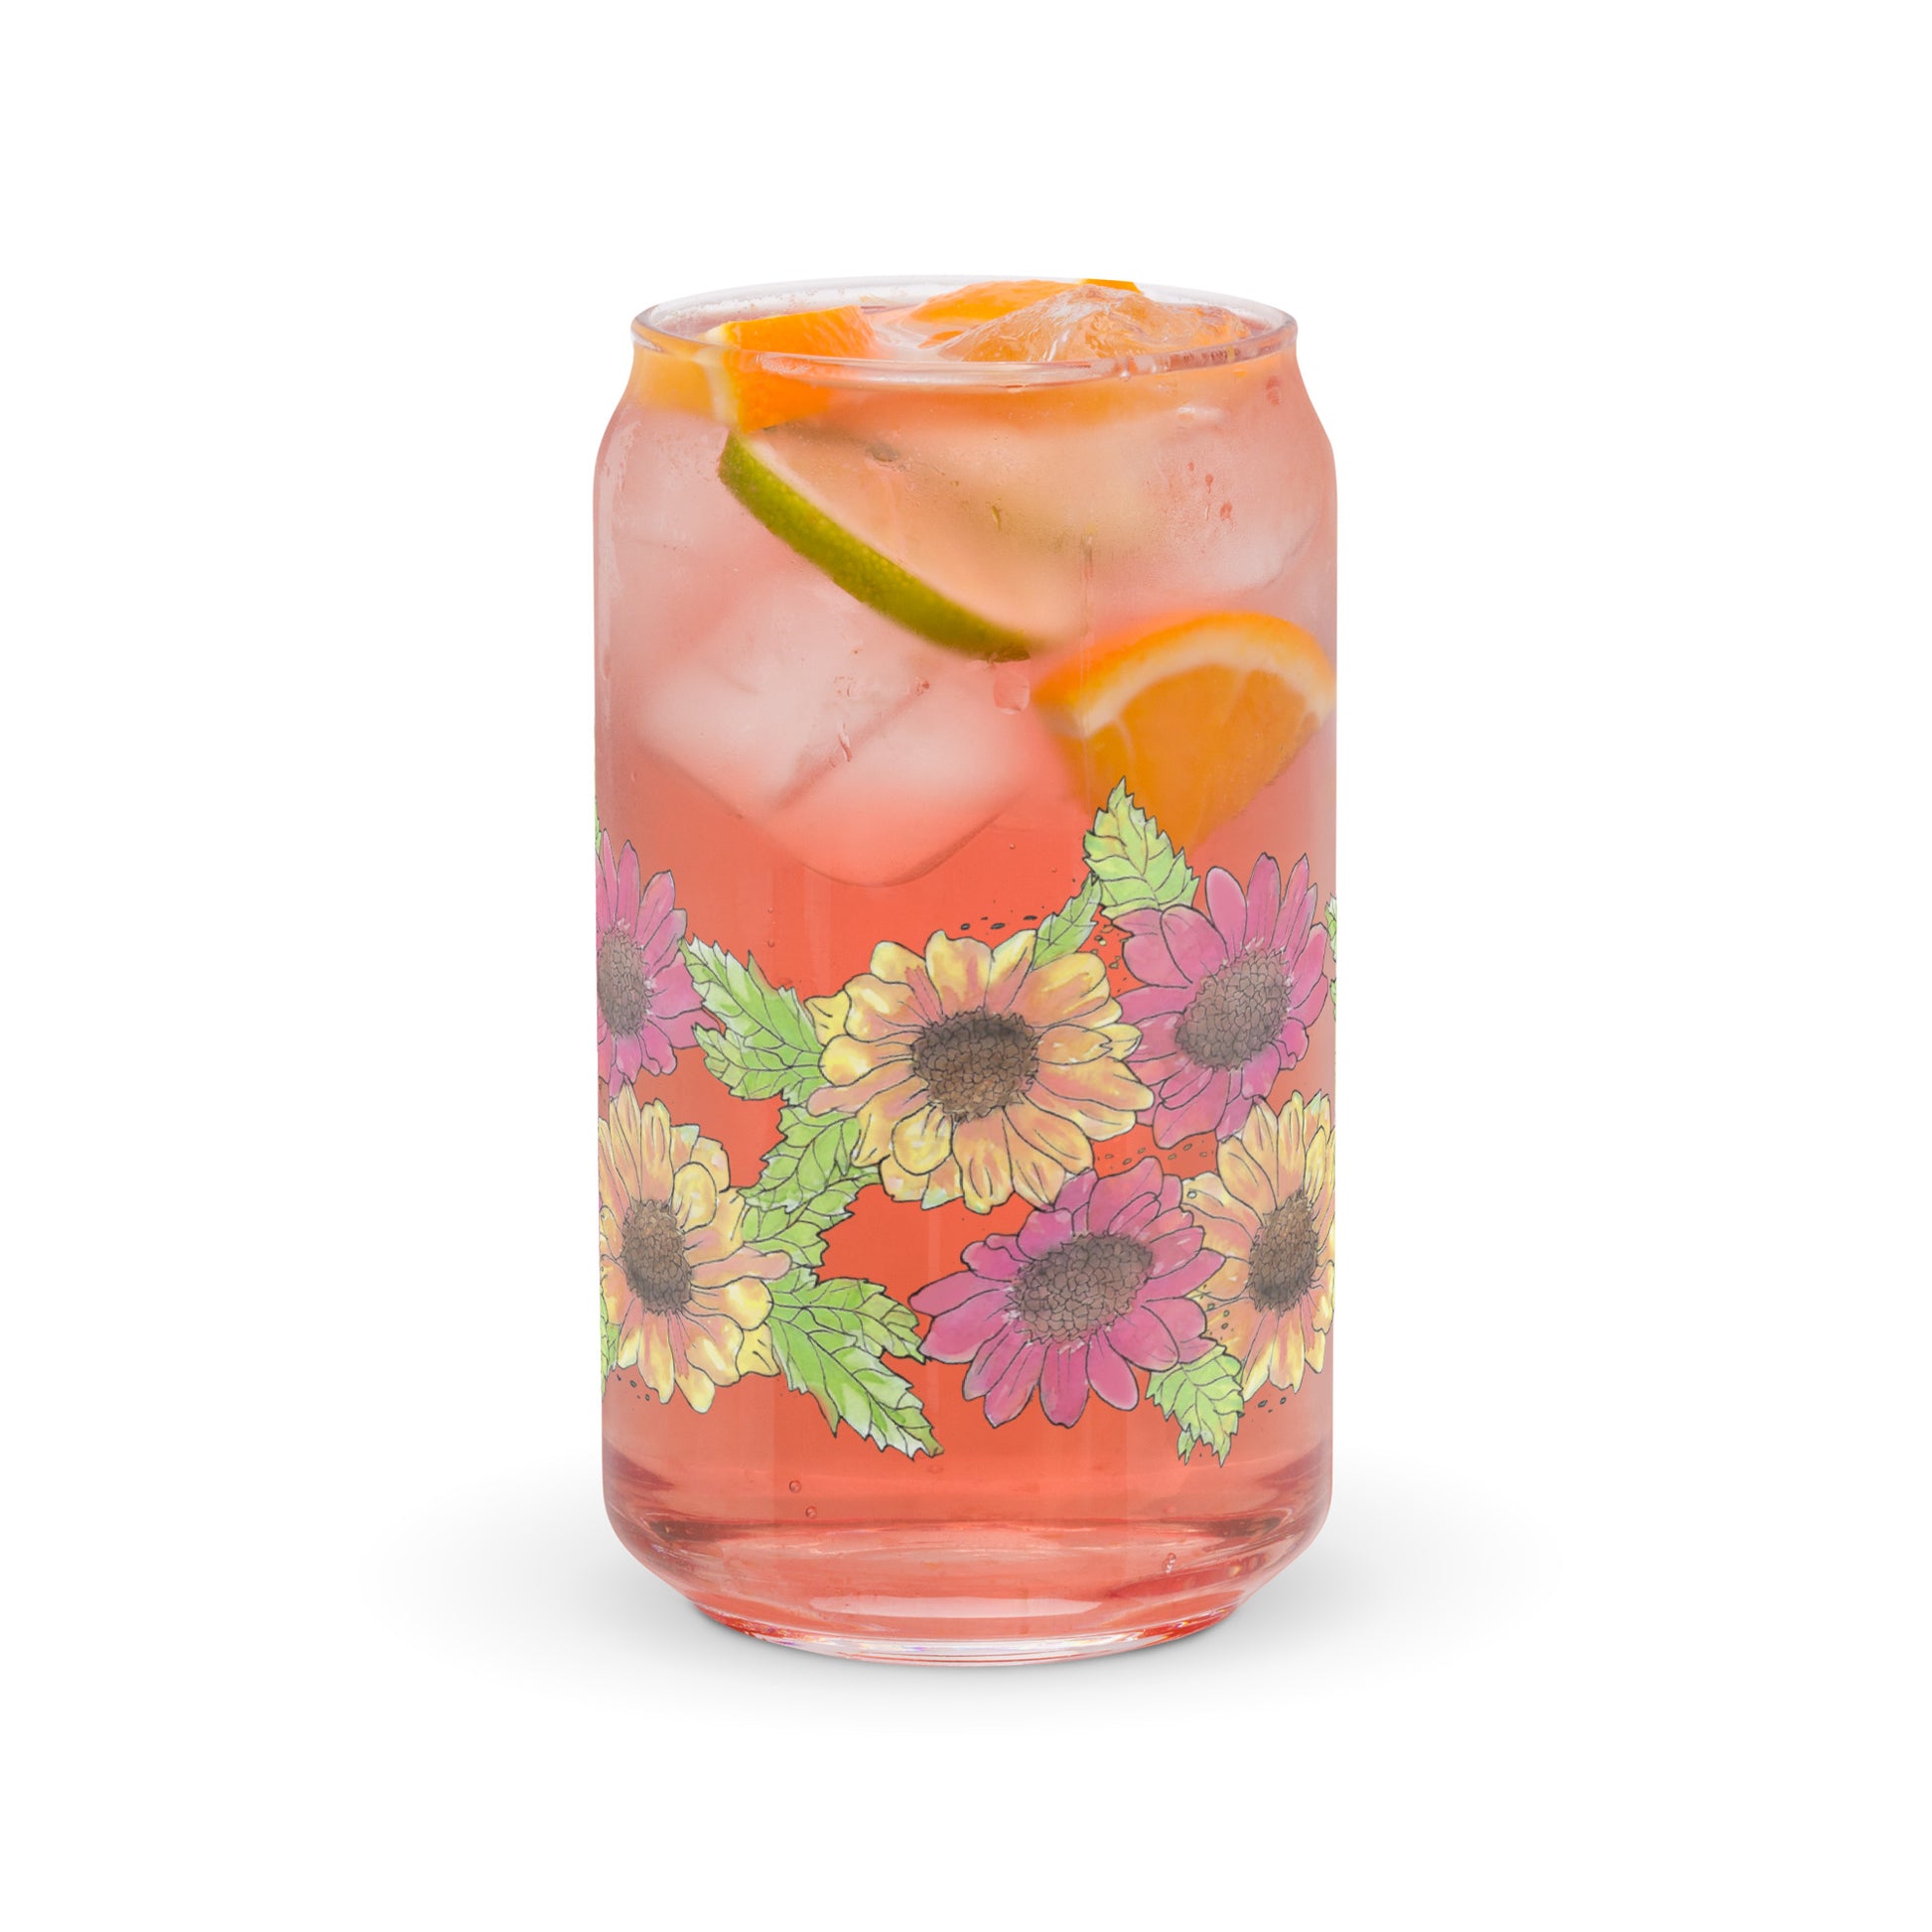 16 ounce can-shaped glass. Features wraparound print of watercolor Gerber daisies. Shown filled with pink lemonade and citrus wedges.